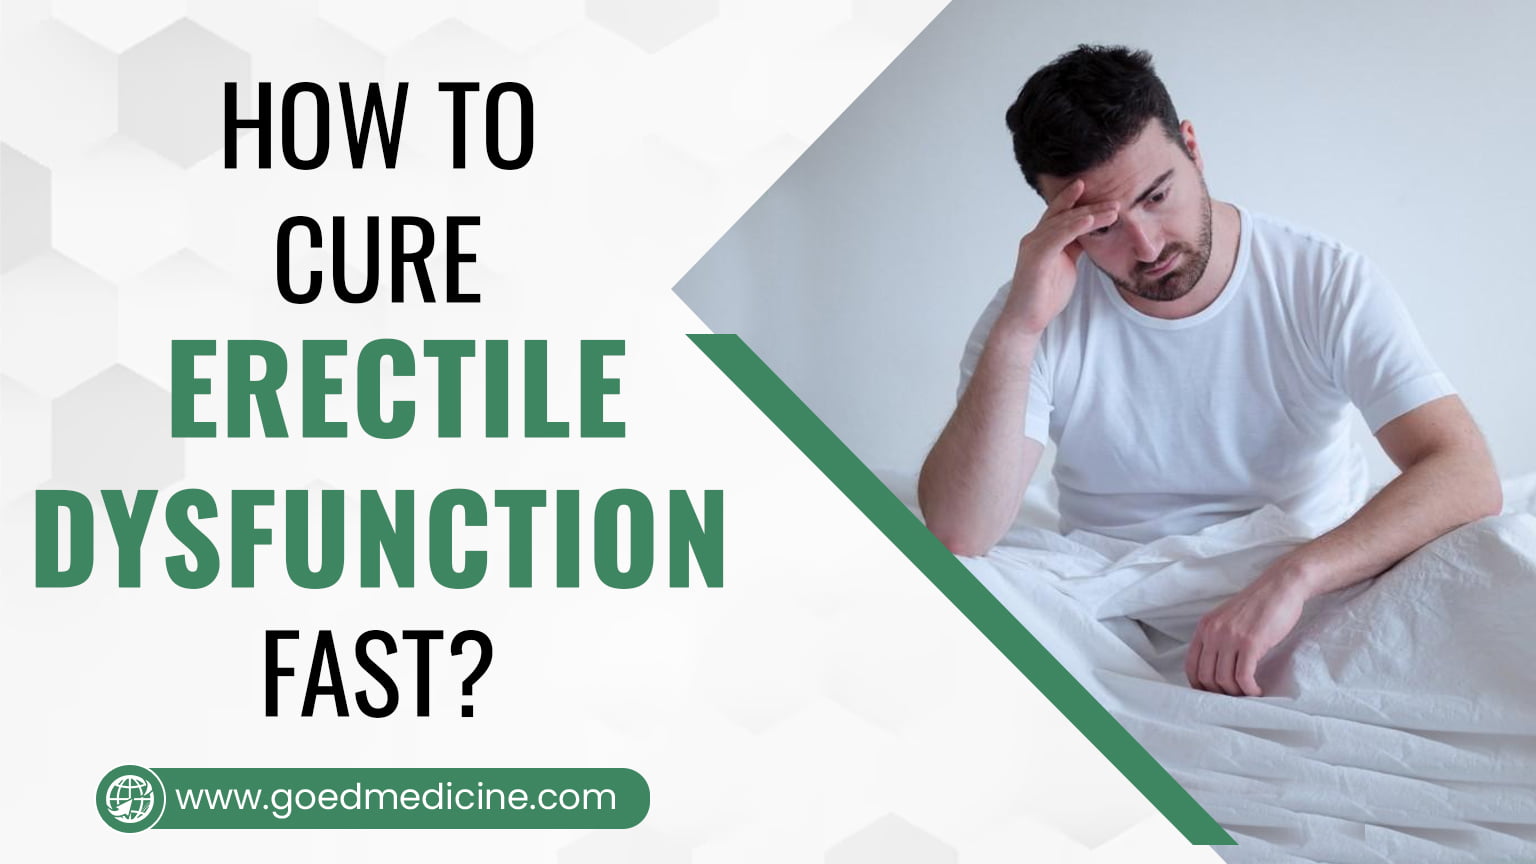 How to Cure Erectile Dysfunction Fast